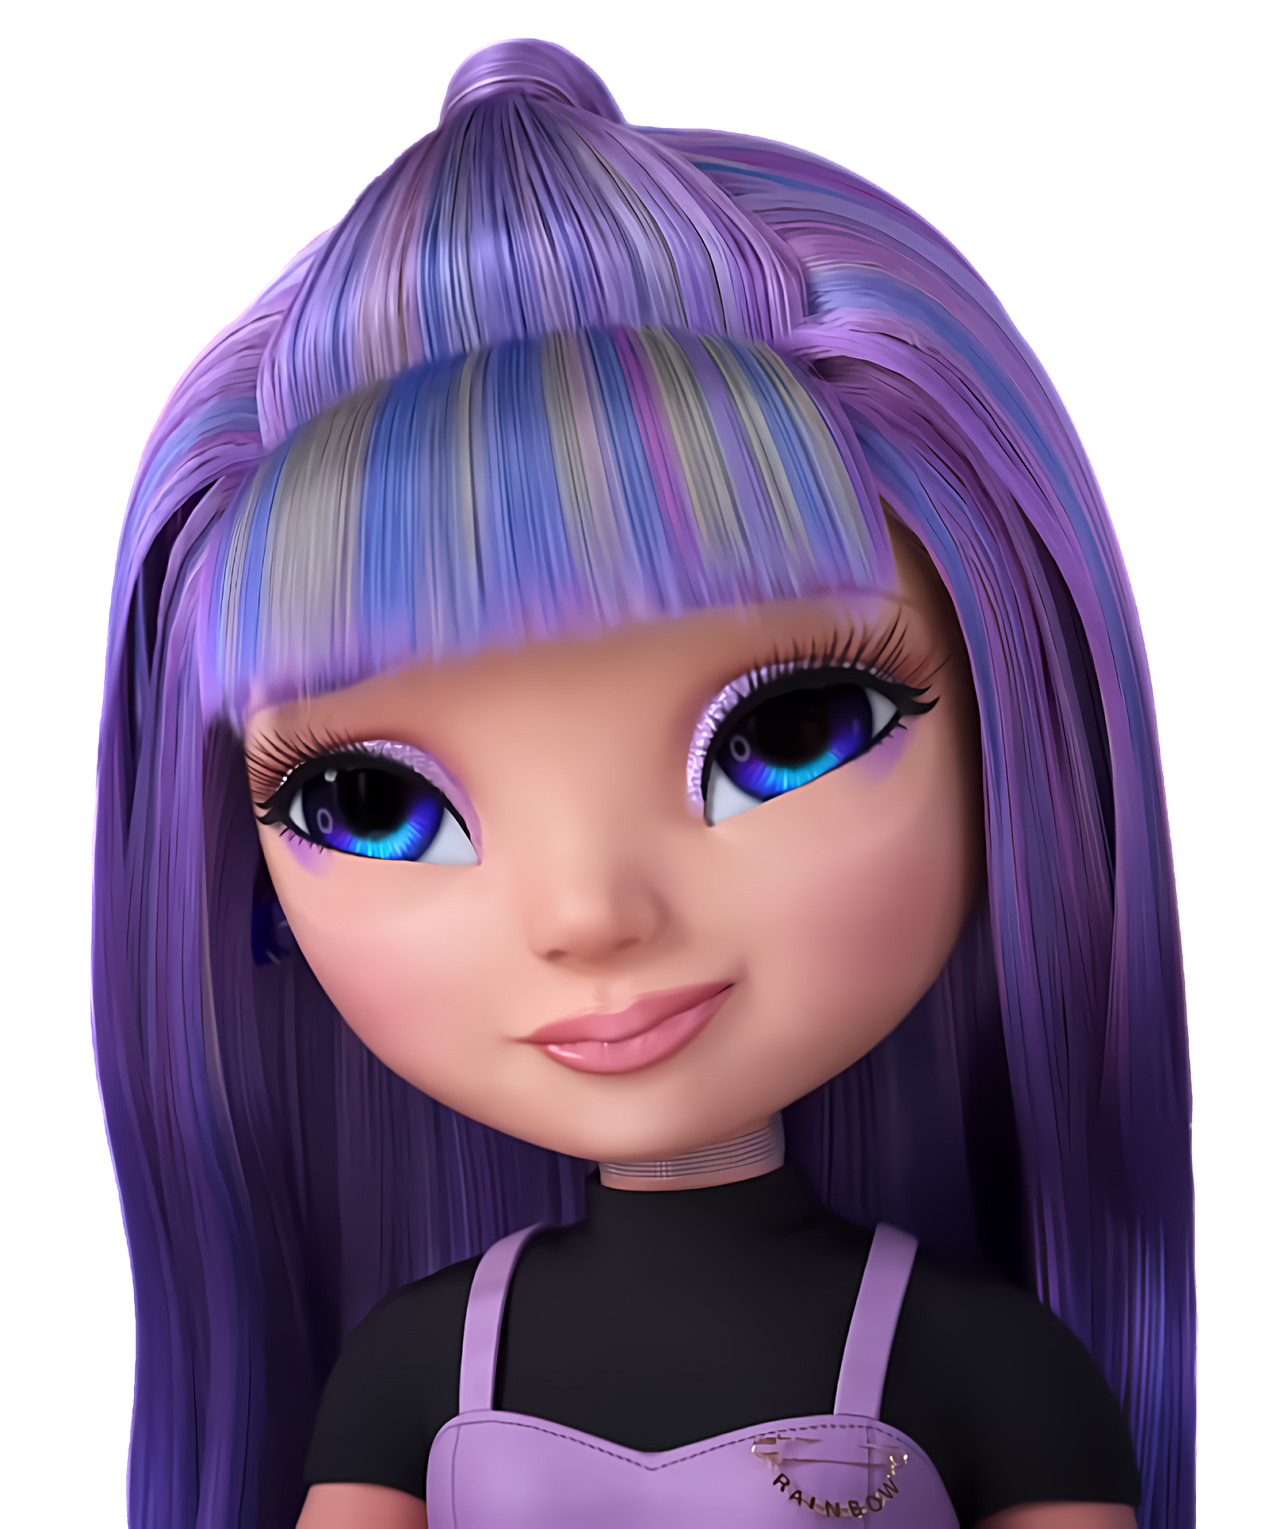 Pictures of animated Rainbow High Violet Willow